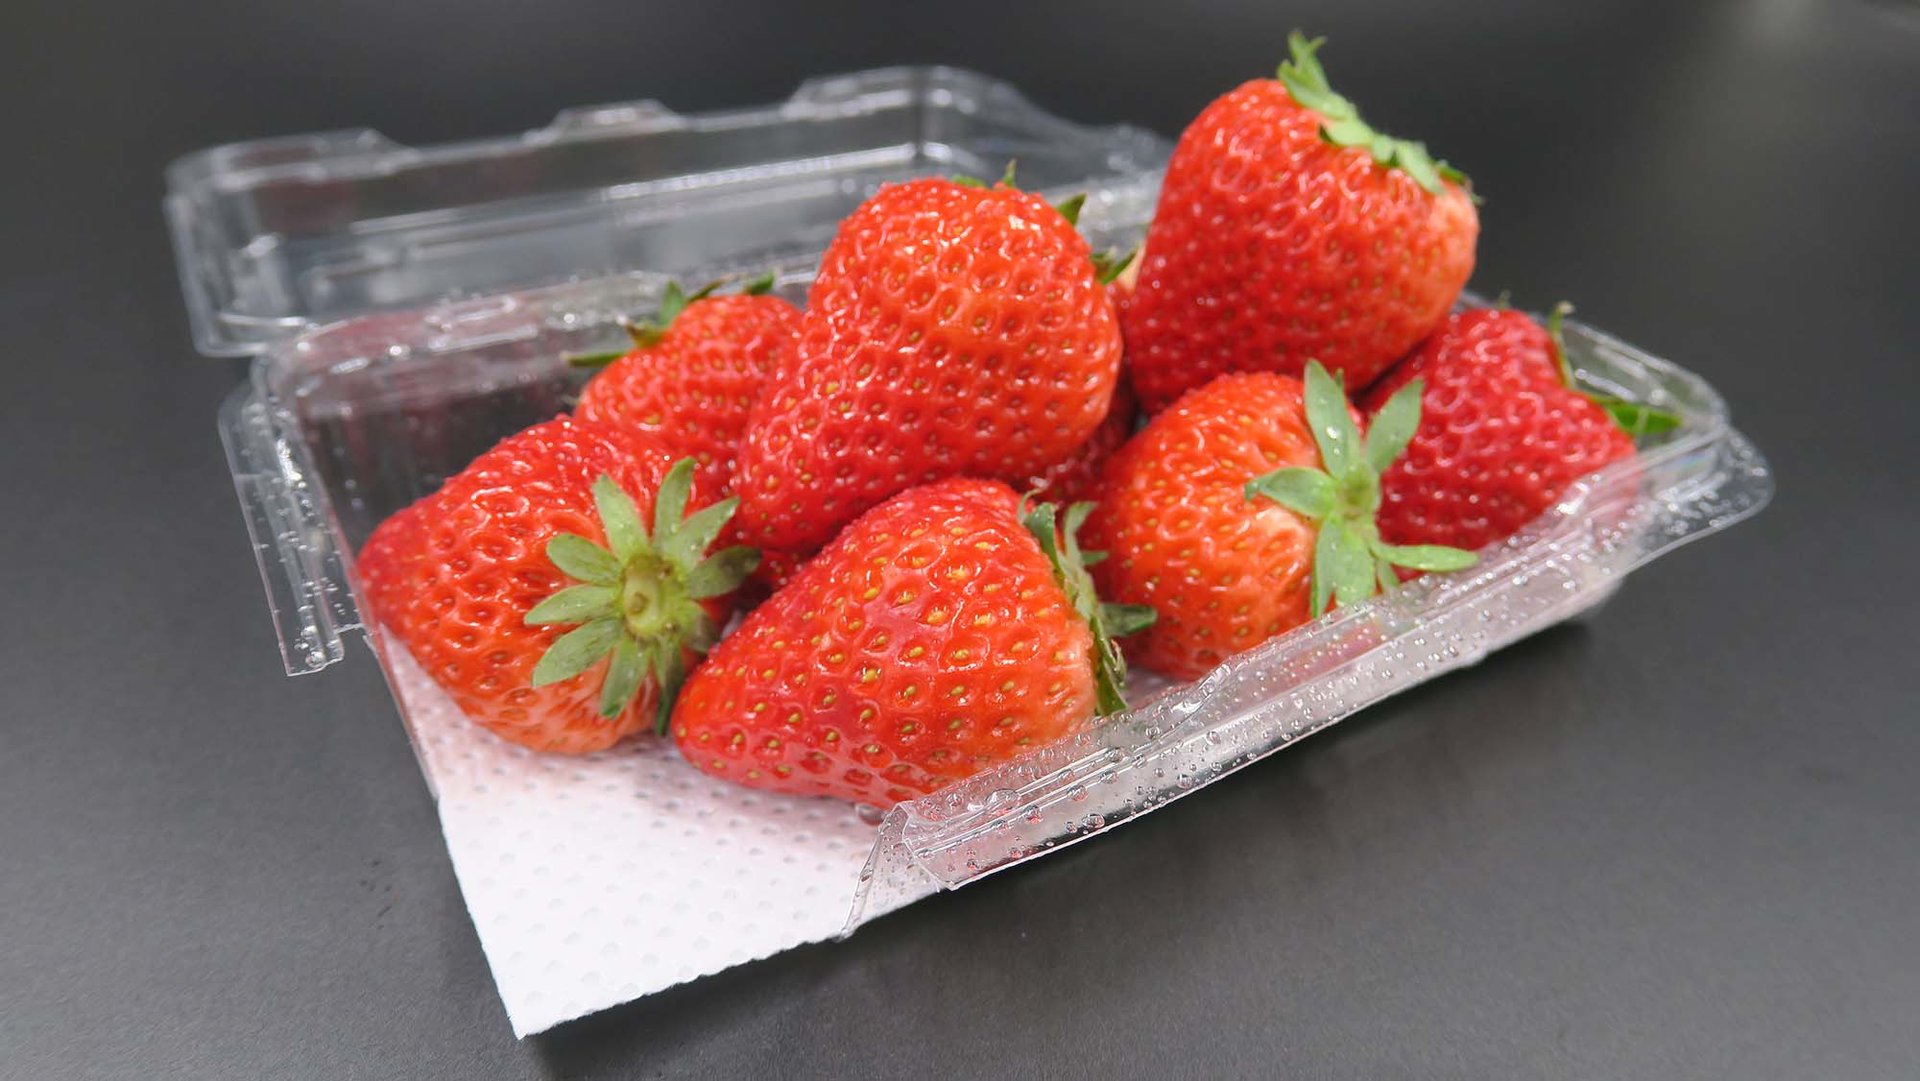 professional universal absorbent pads maintaining great product presentation for fruit Demi